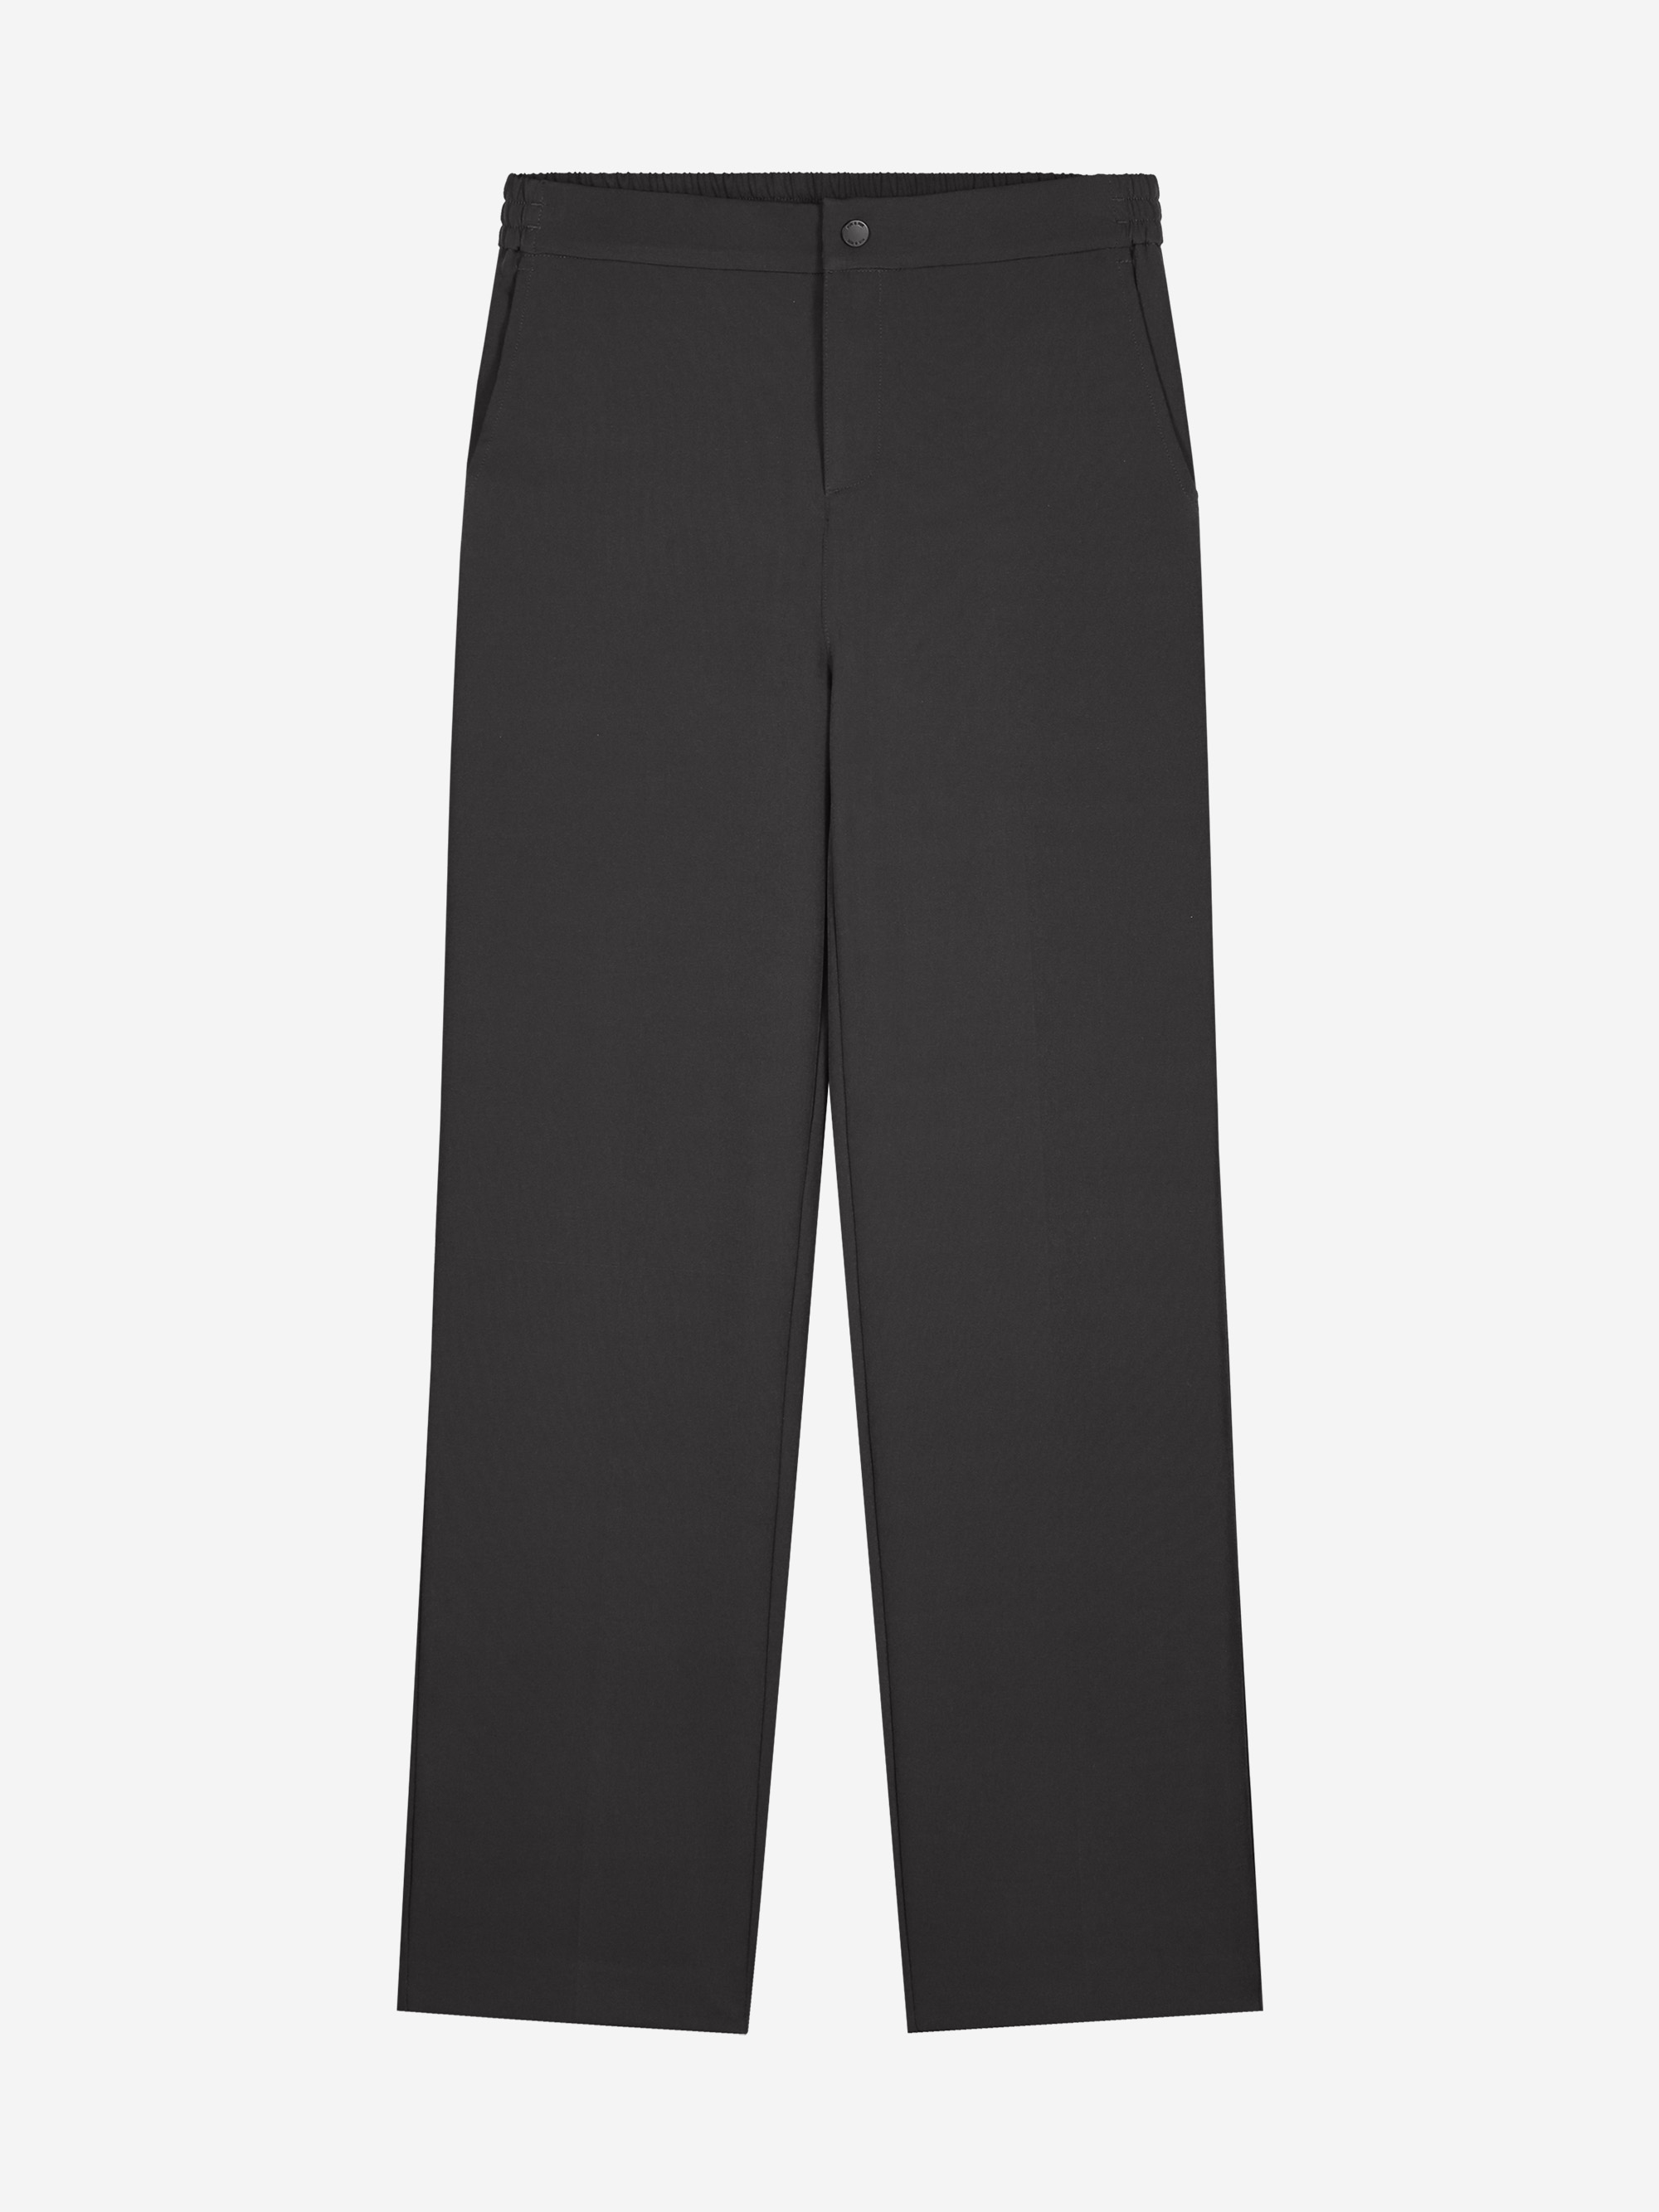 Low rise trousers